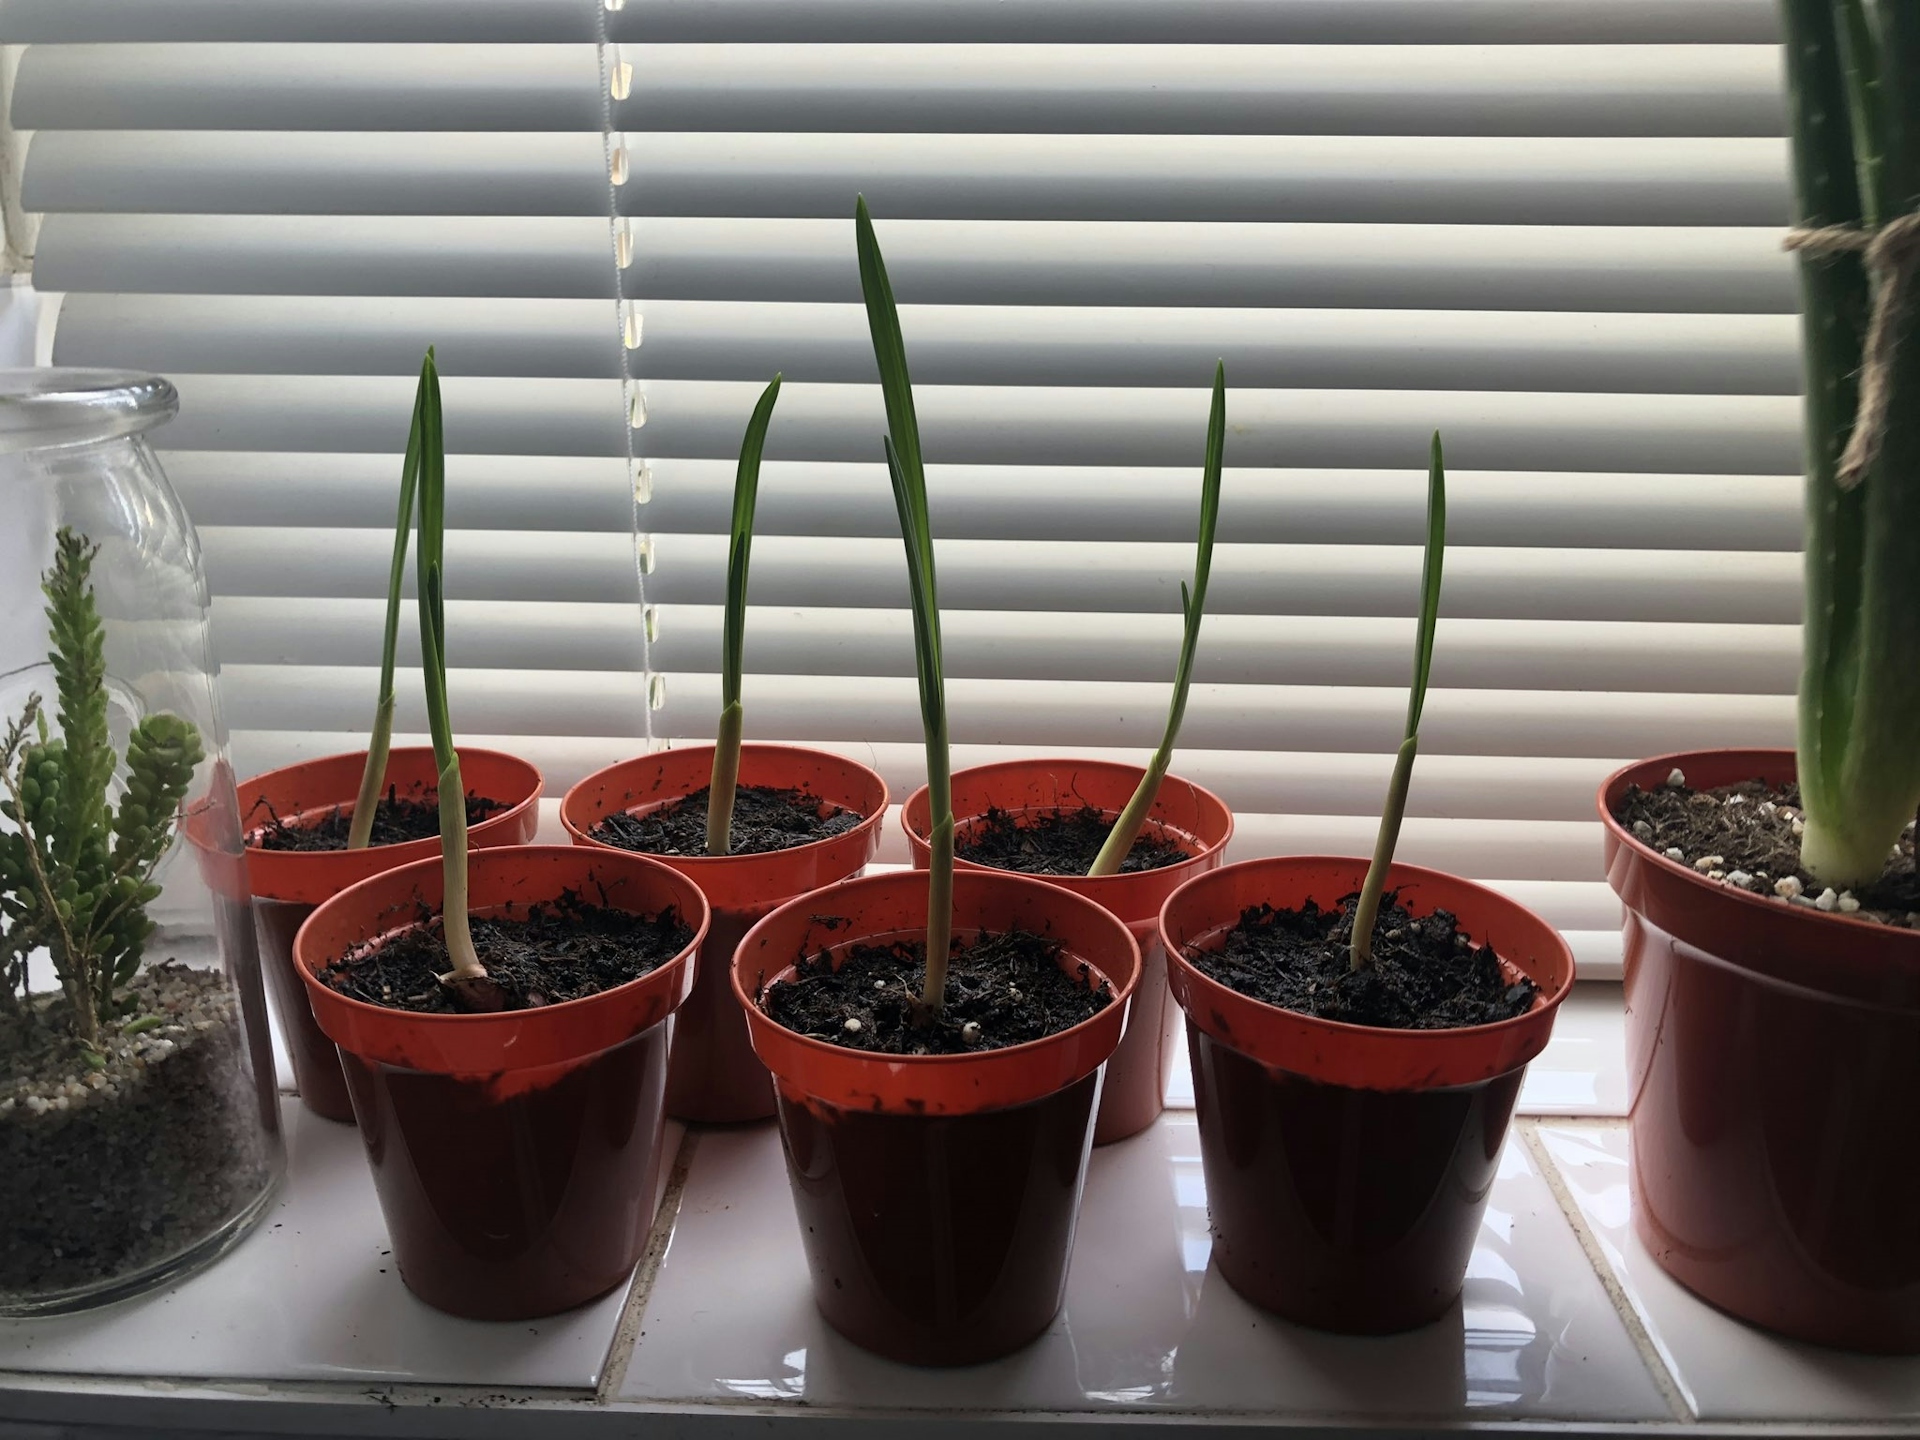 Potted cloves of garlic